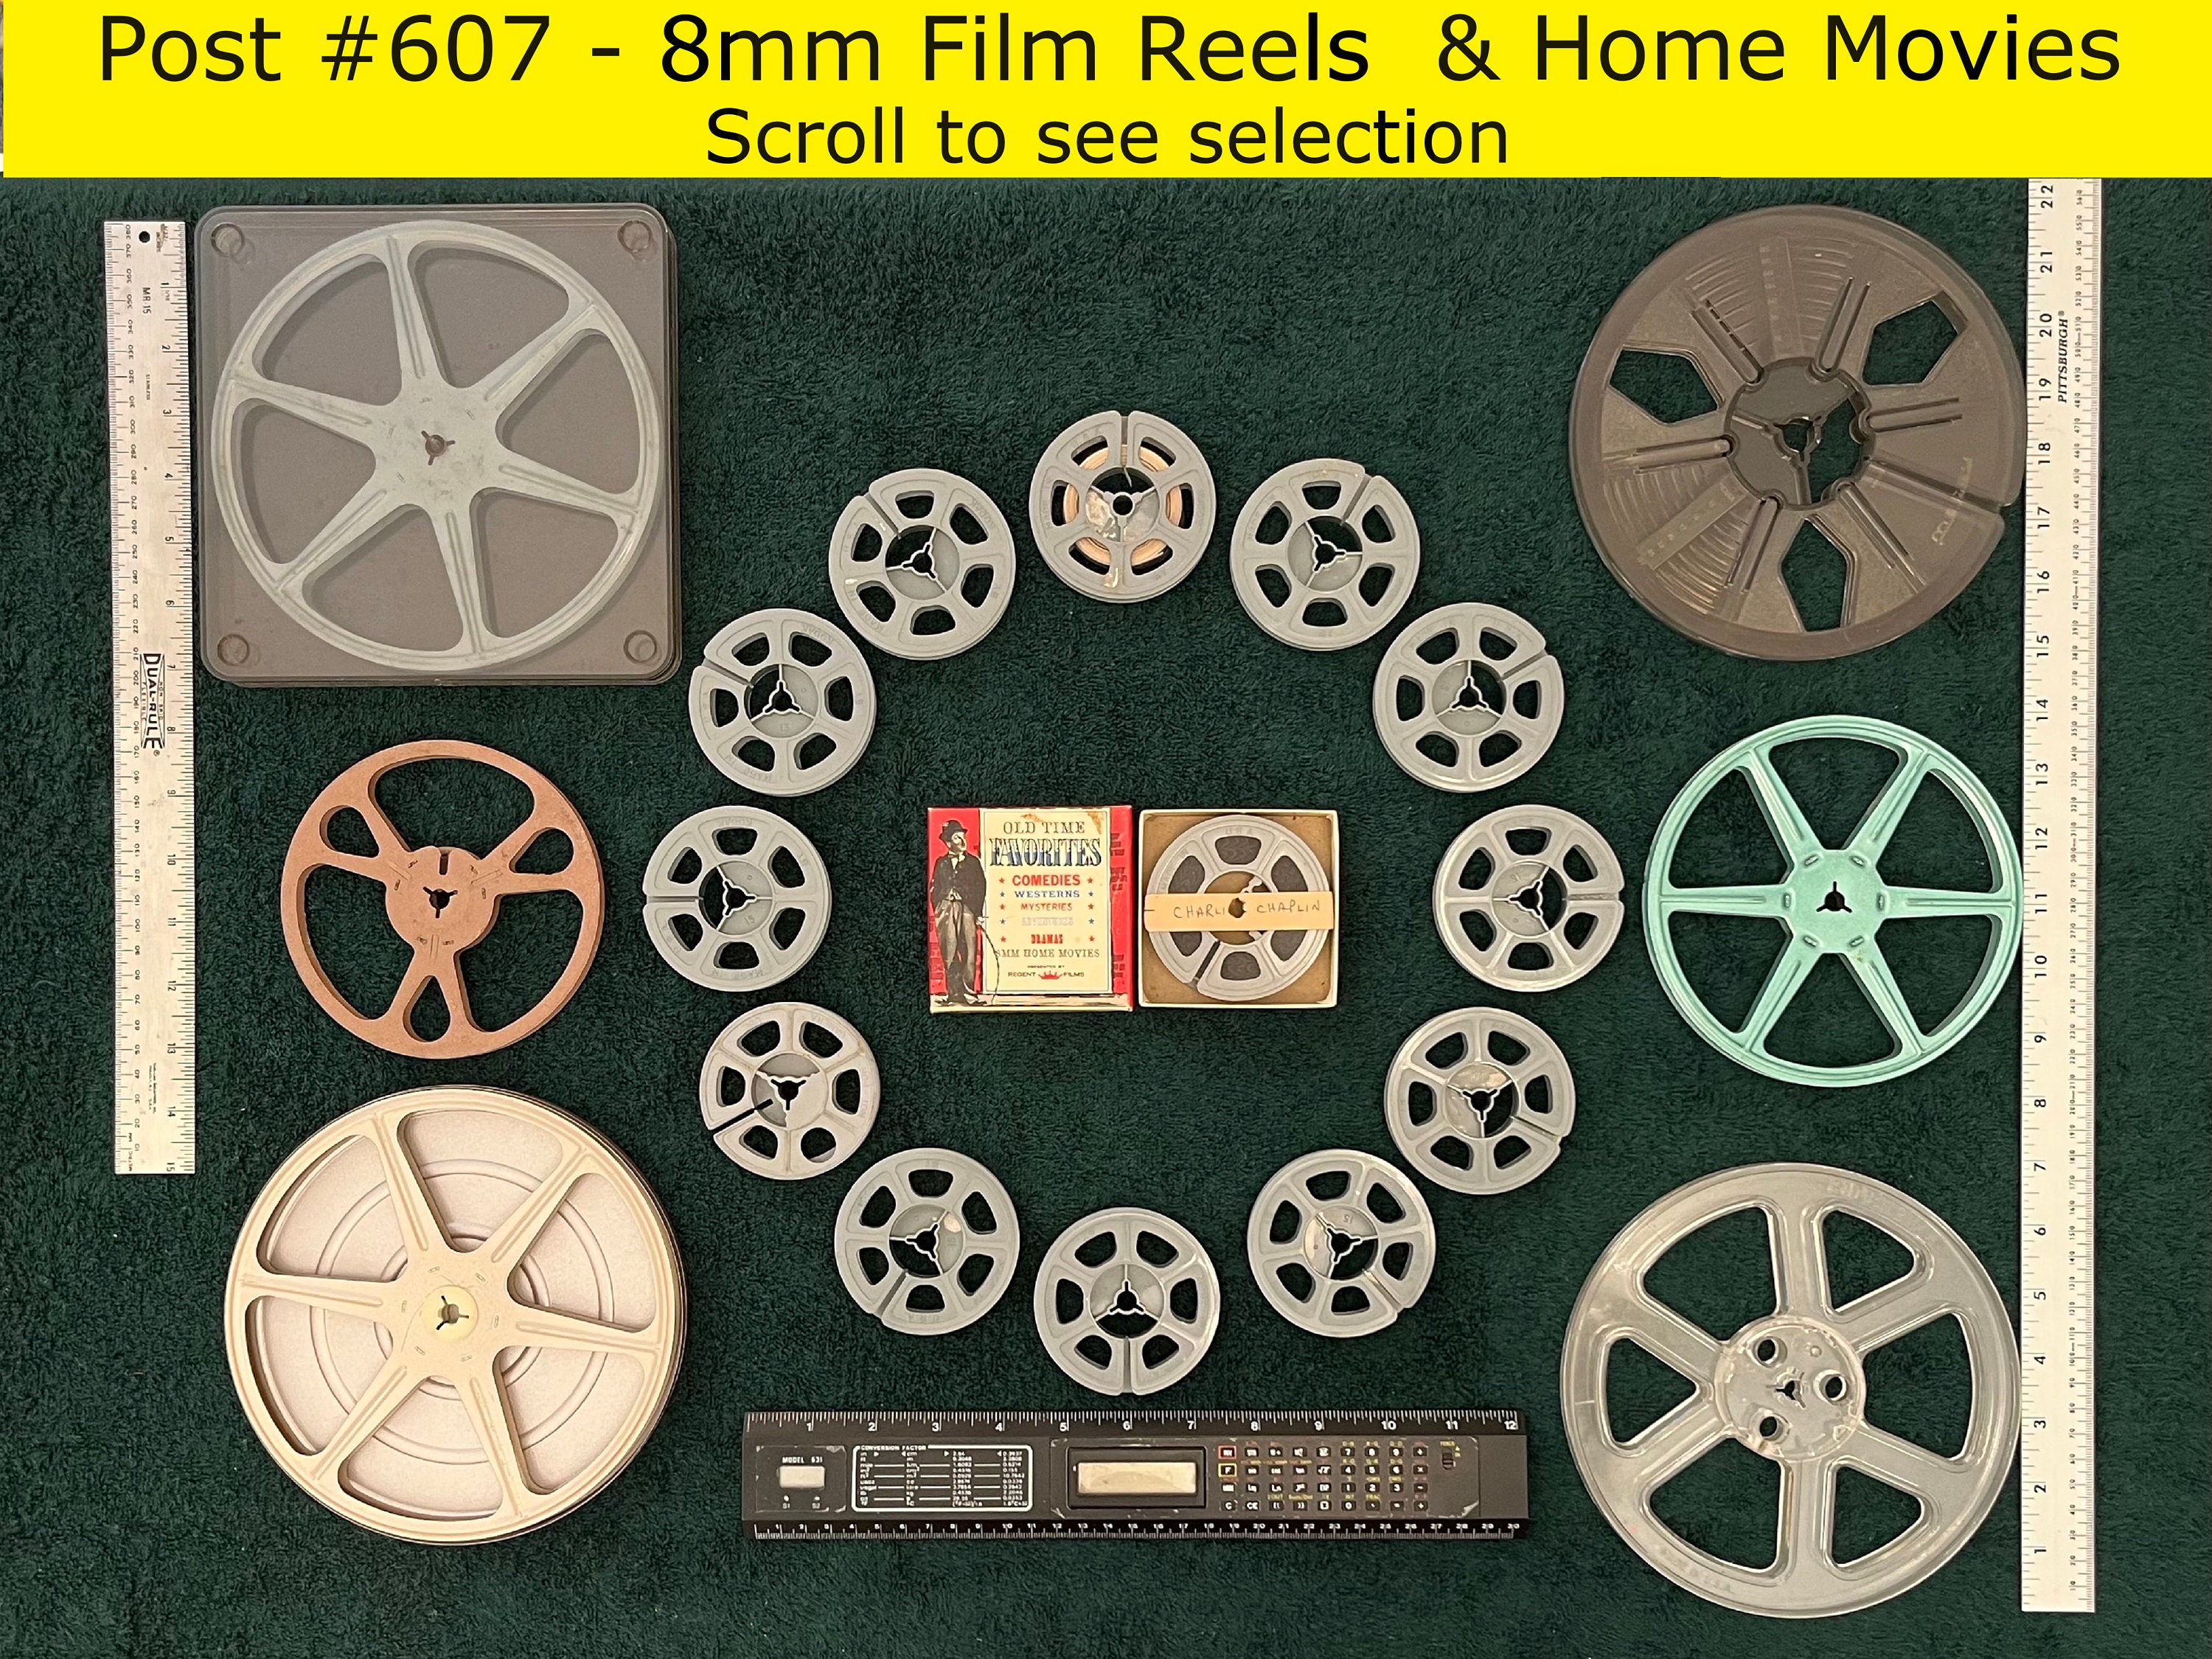 Vintage 8mm Film Reels, Canisters and Home Movies post 607 